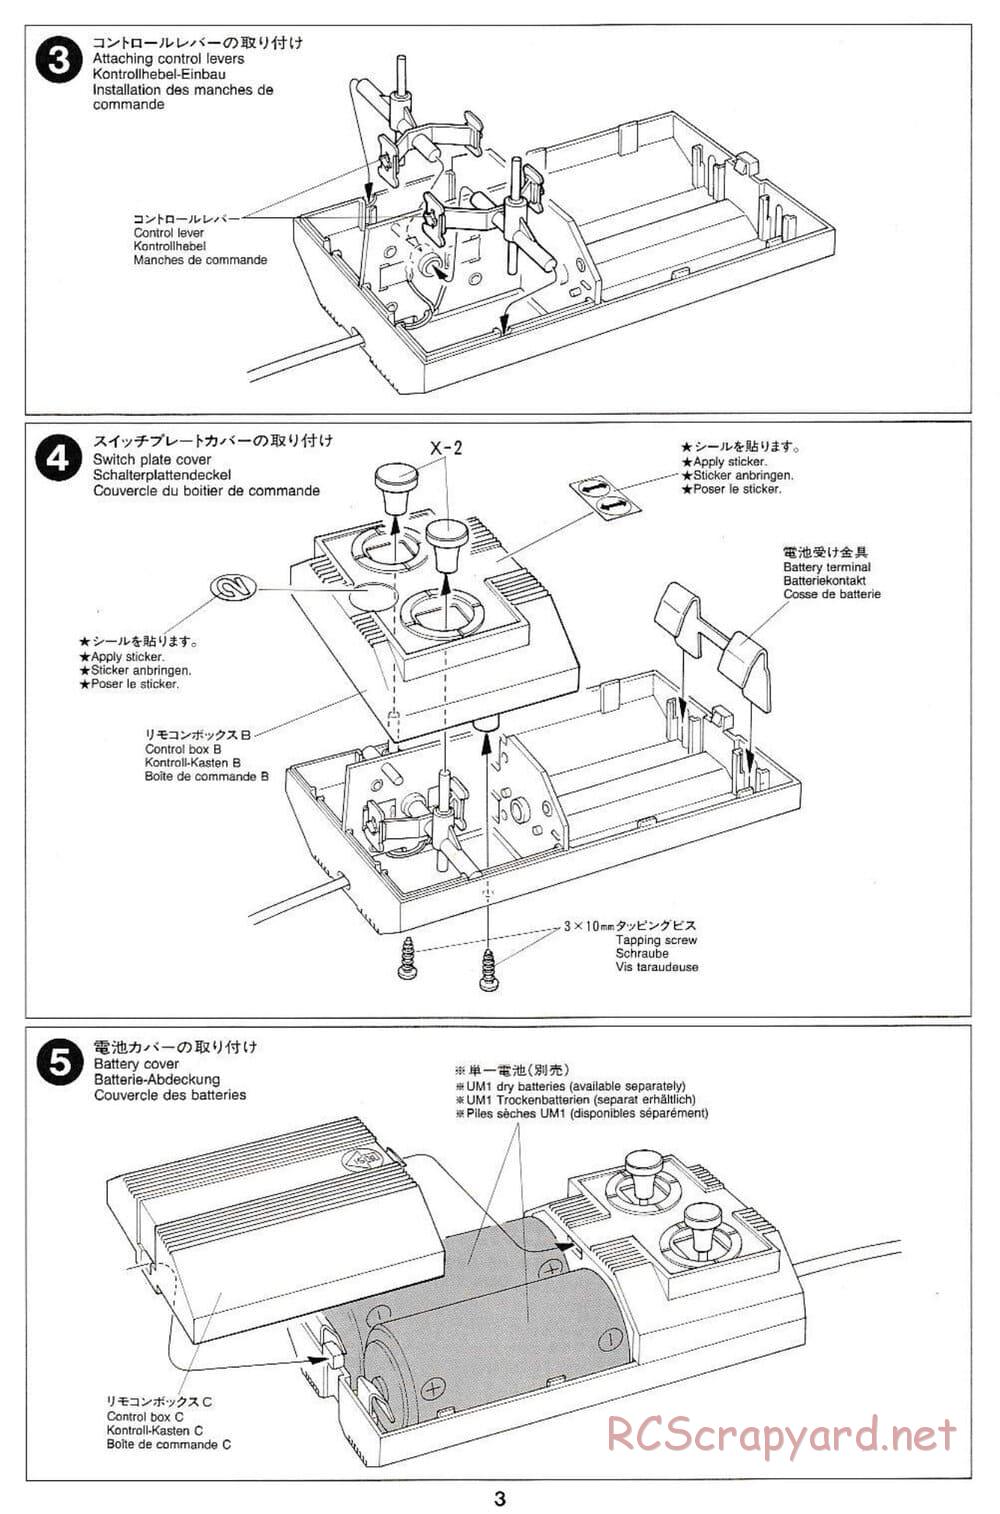 Tamiya - J.G.S.D.F. Type 74 - 1/35 Scale Chassis - Manual - Page 3